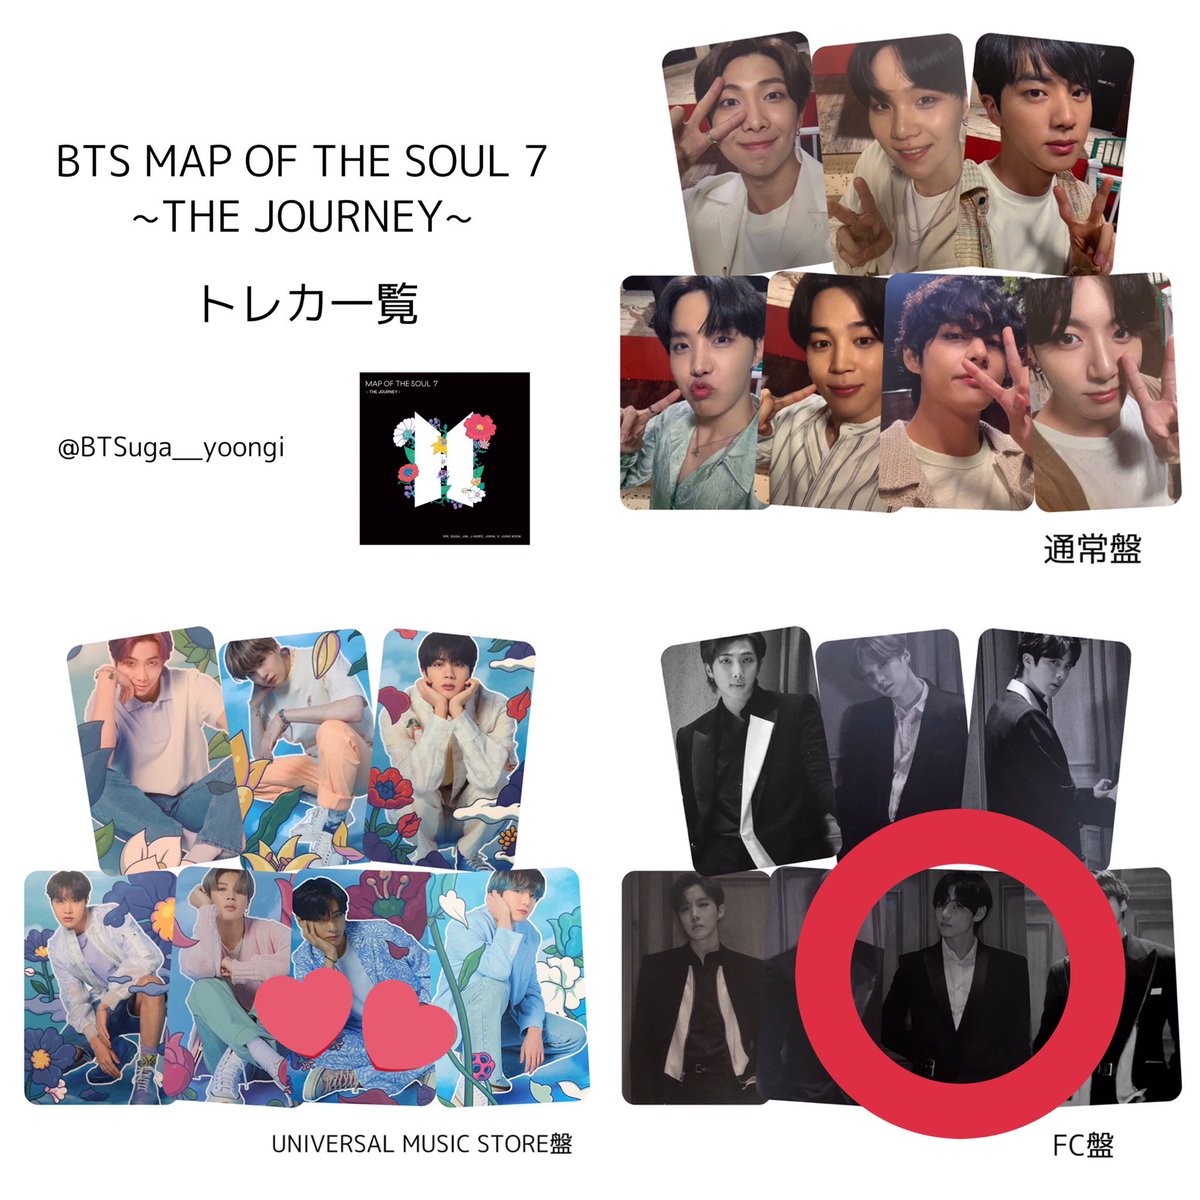 BTS MAP OF THE SEOUL 7 the Journey 特典トレカ